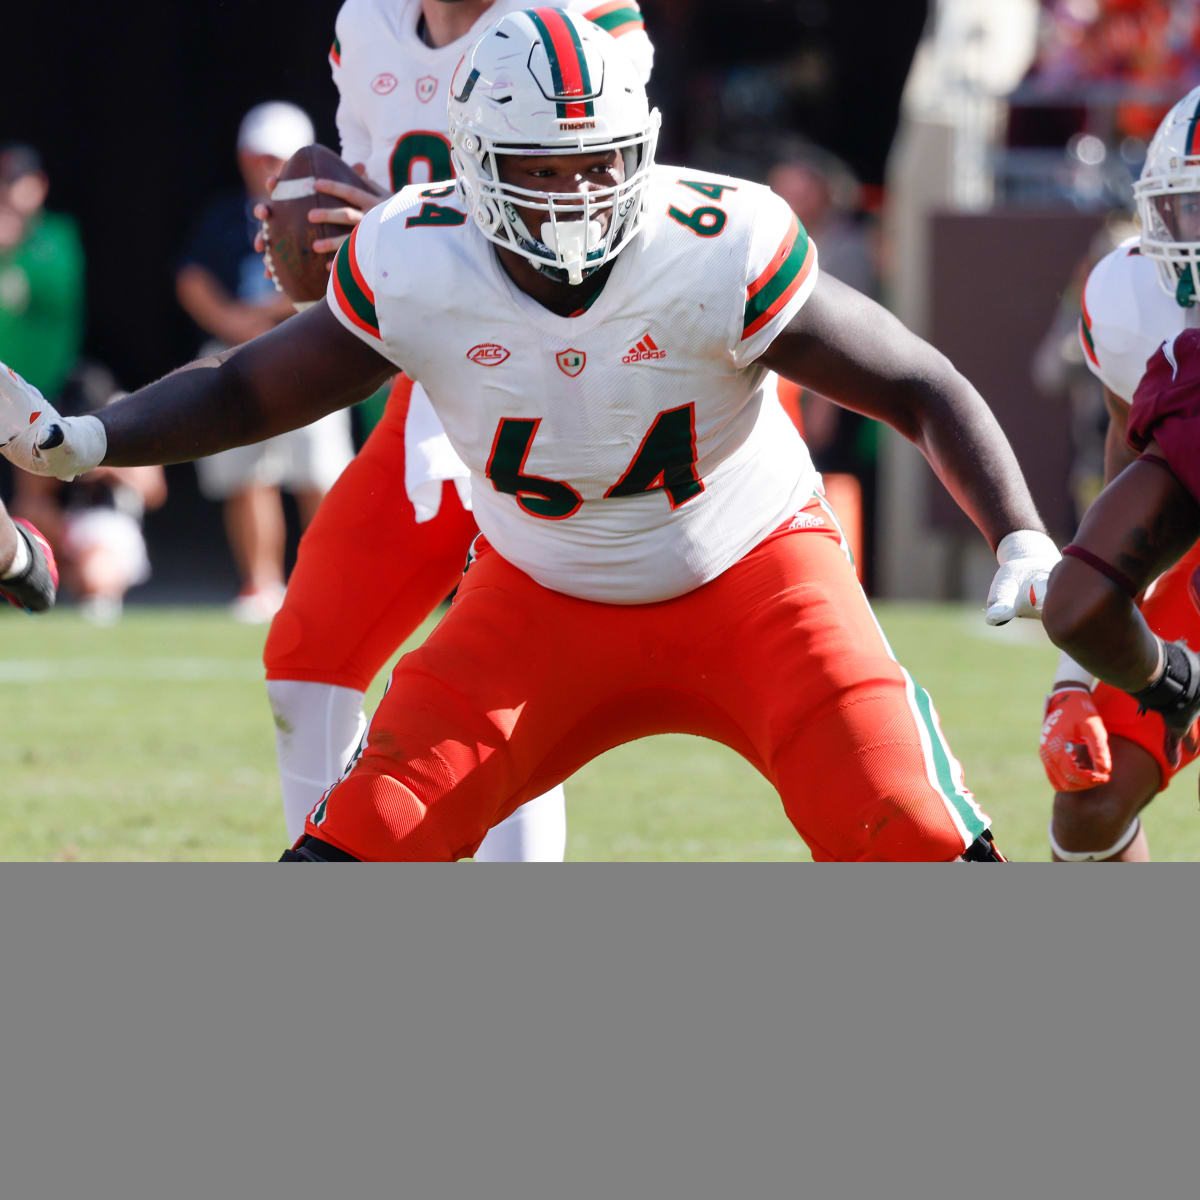 A look at the Hurricanes' offensive line entering the season